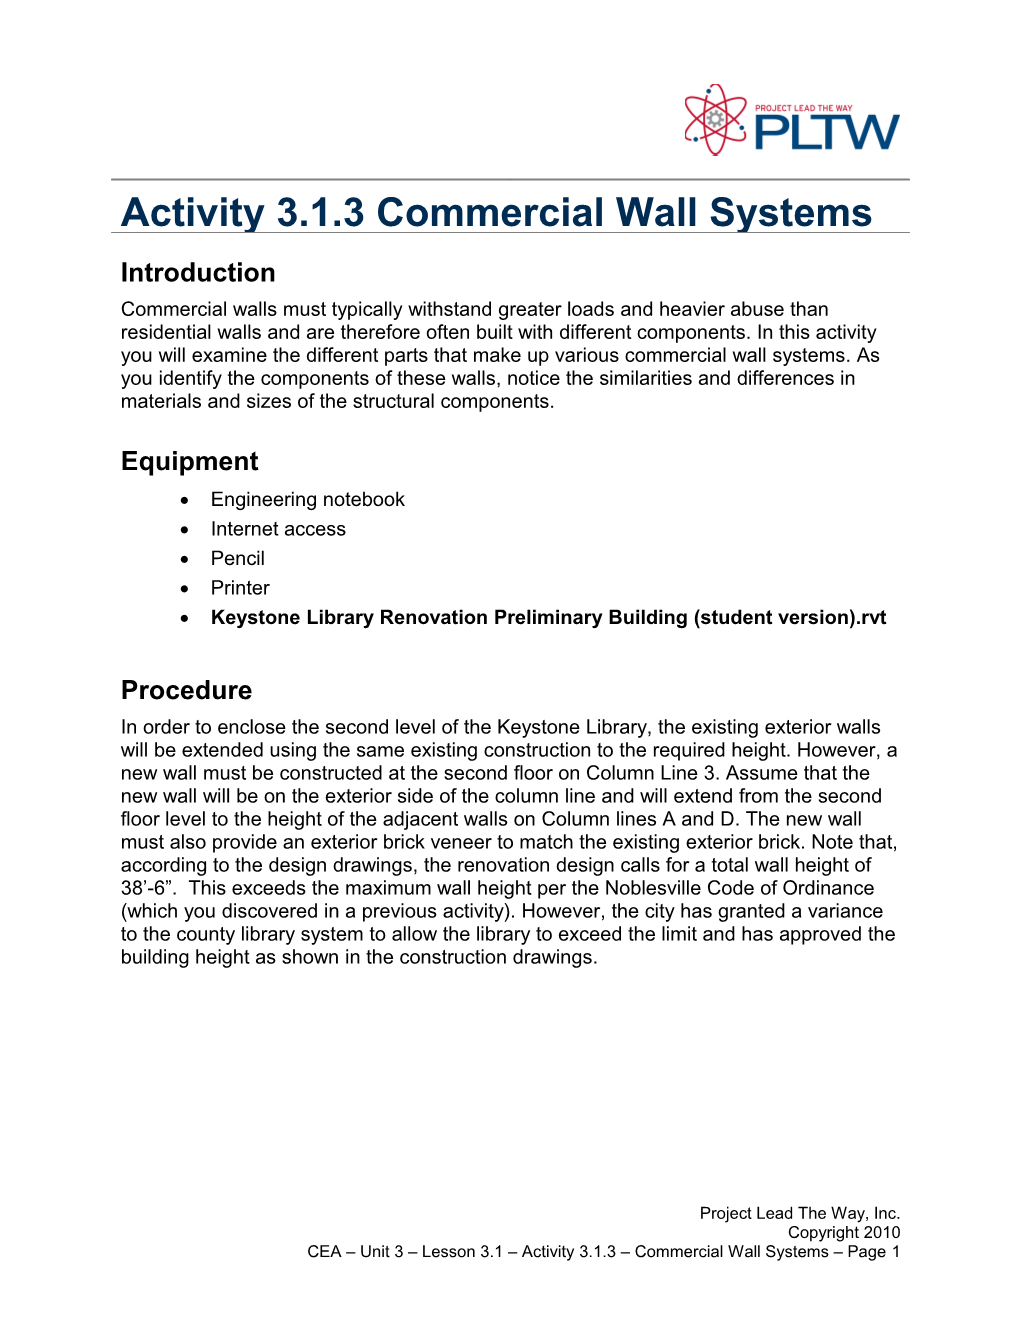 Activity 3.1.3 - Commercial Floor Systems